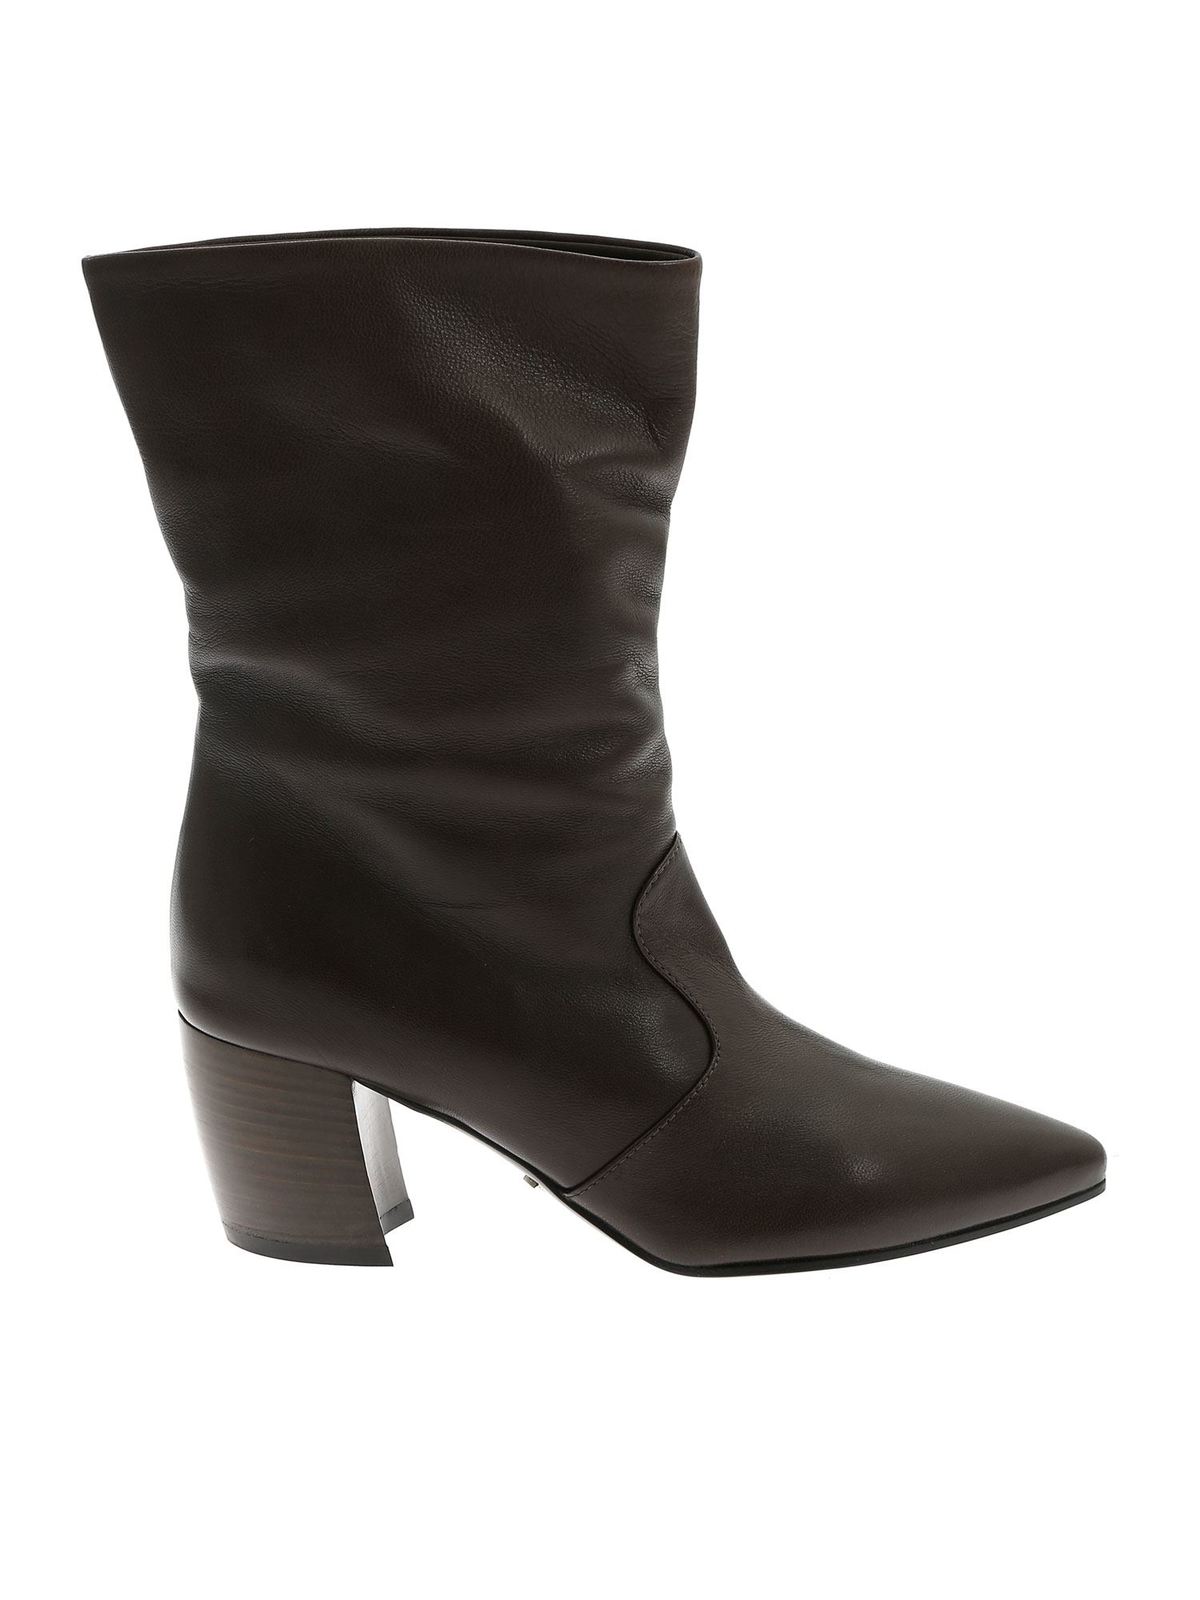 PRADA POINTED ANKLE BOOTS IN DARK GRAY